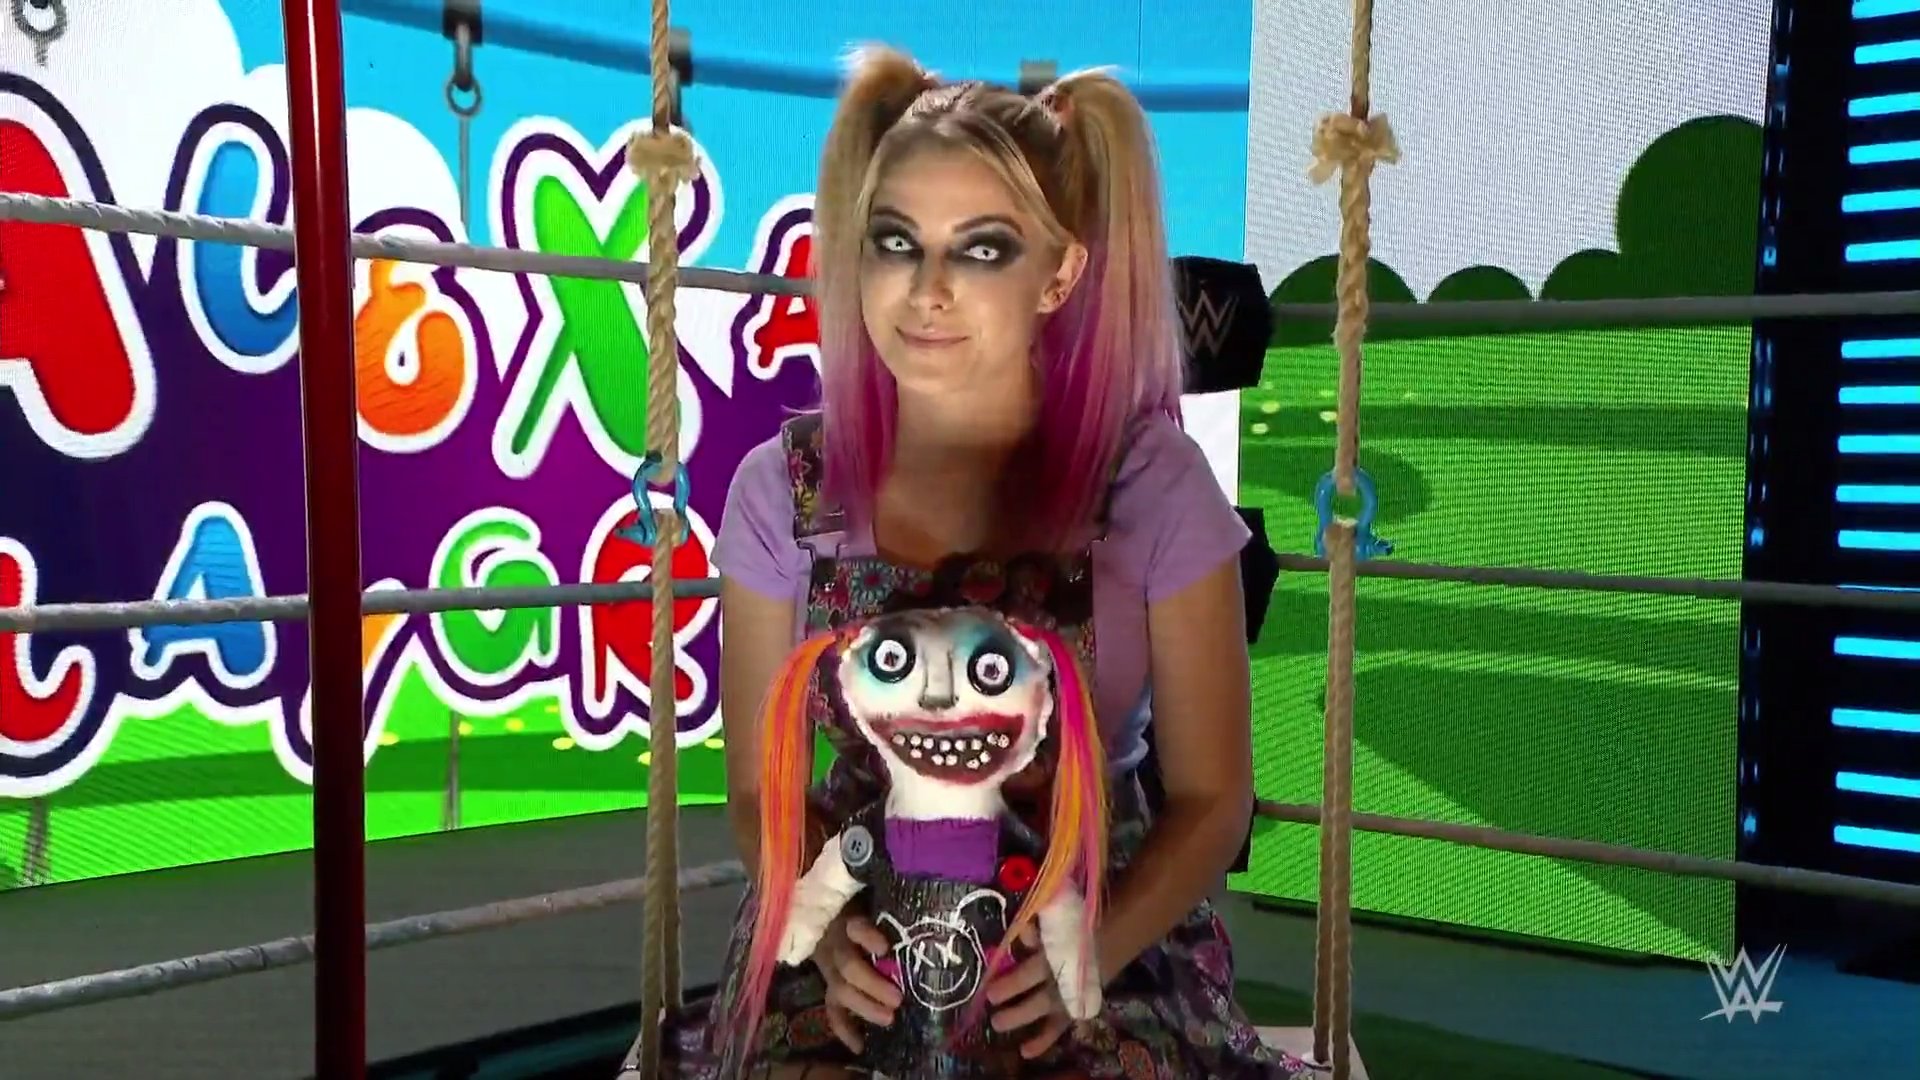 Alexa Bliss with her doll, whose name is Lilly. (WWE)